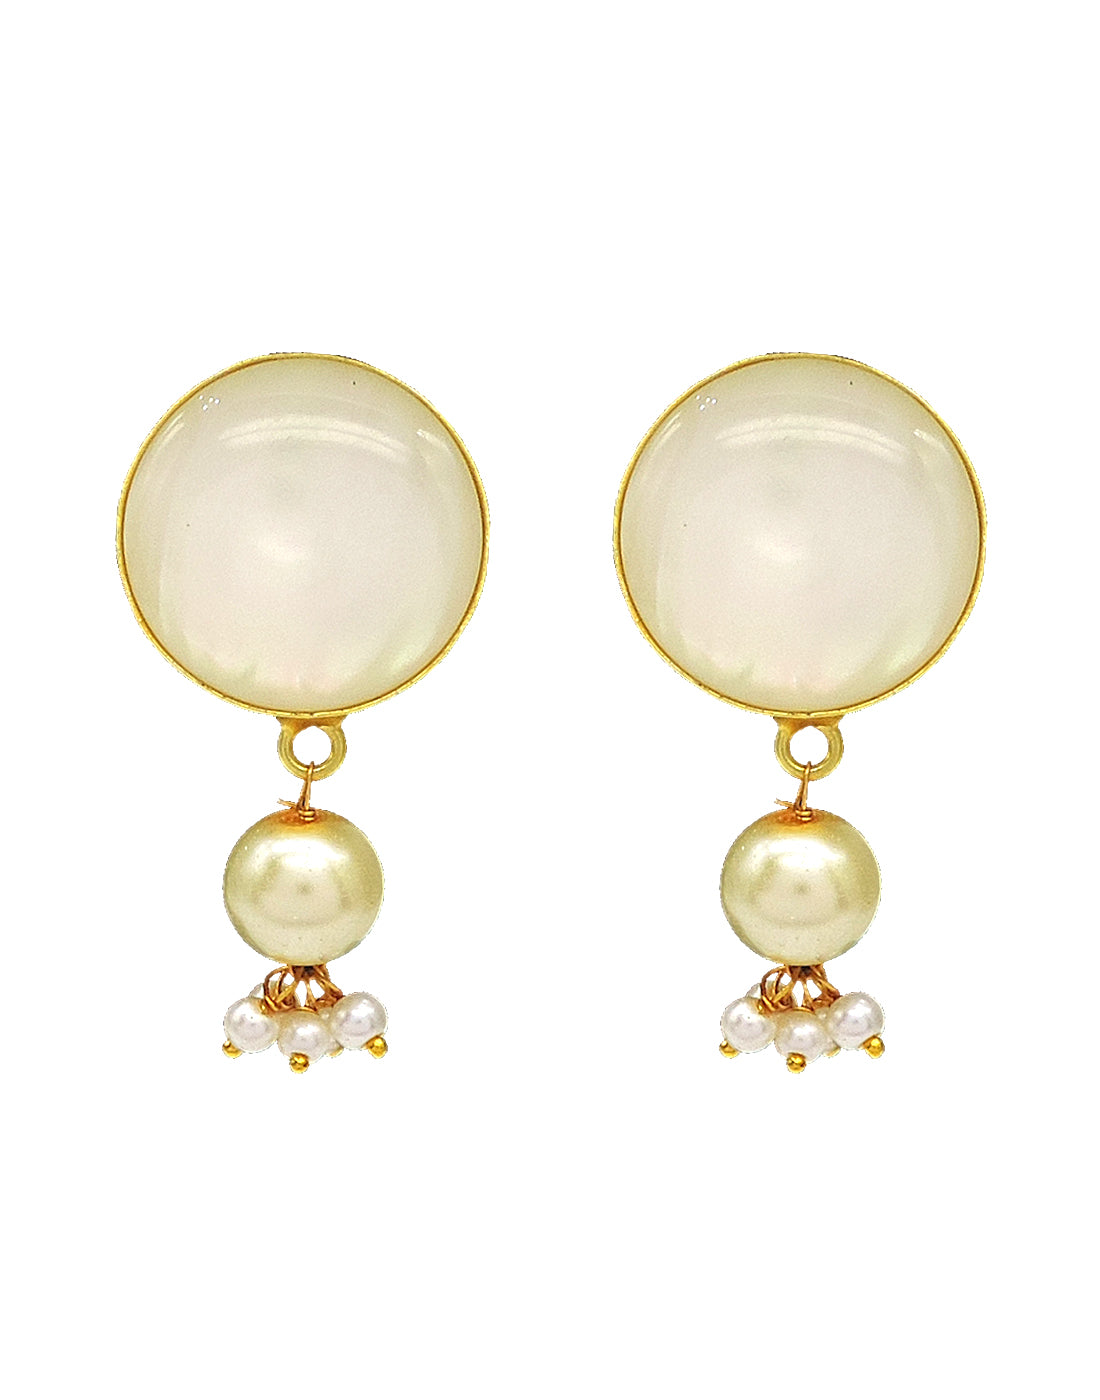 Round Shell Earrings - Statement Earrings - Gold-Plated & Hypoallergenic Jewellery - Made in India - Dubai Jewellery - Dori